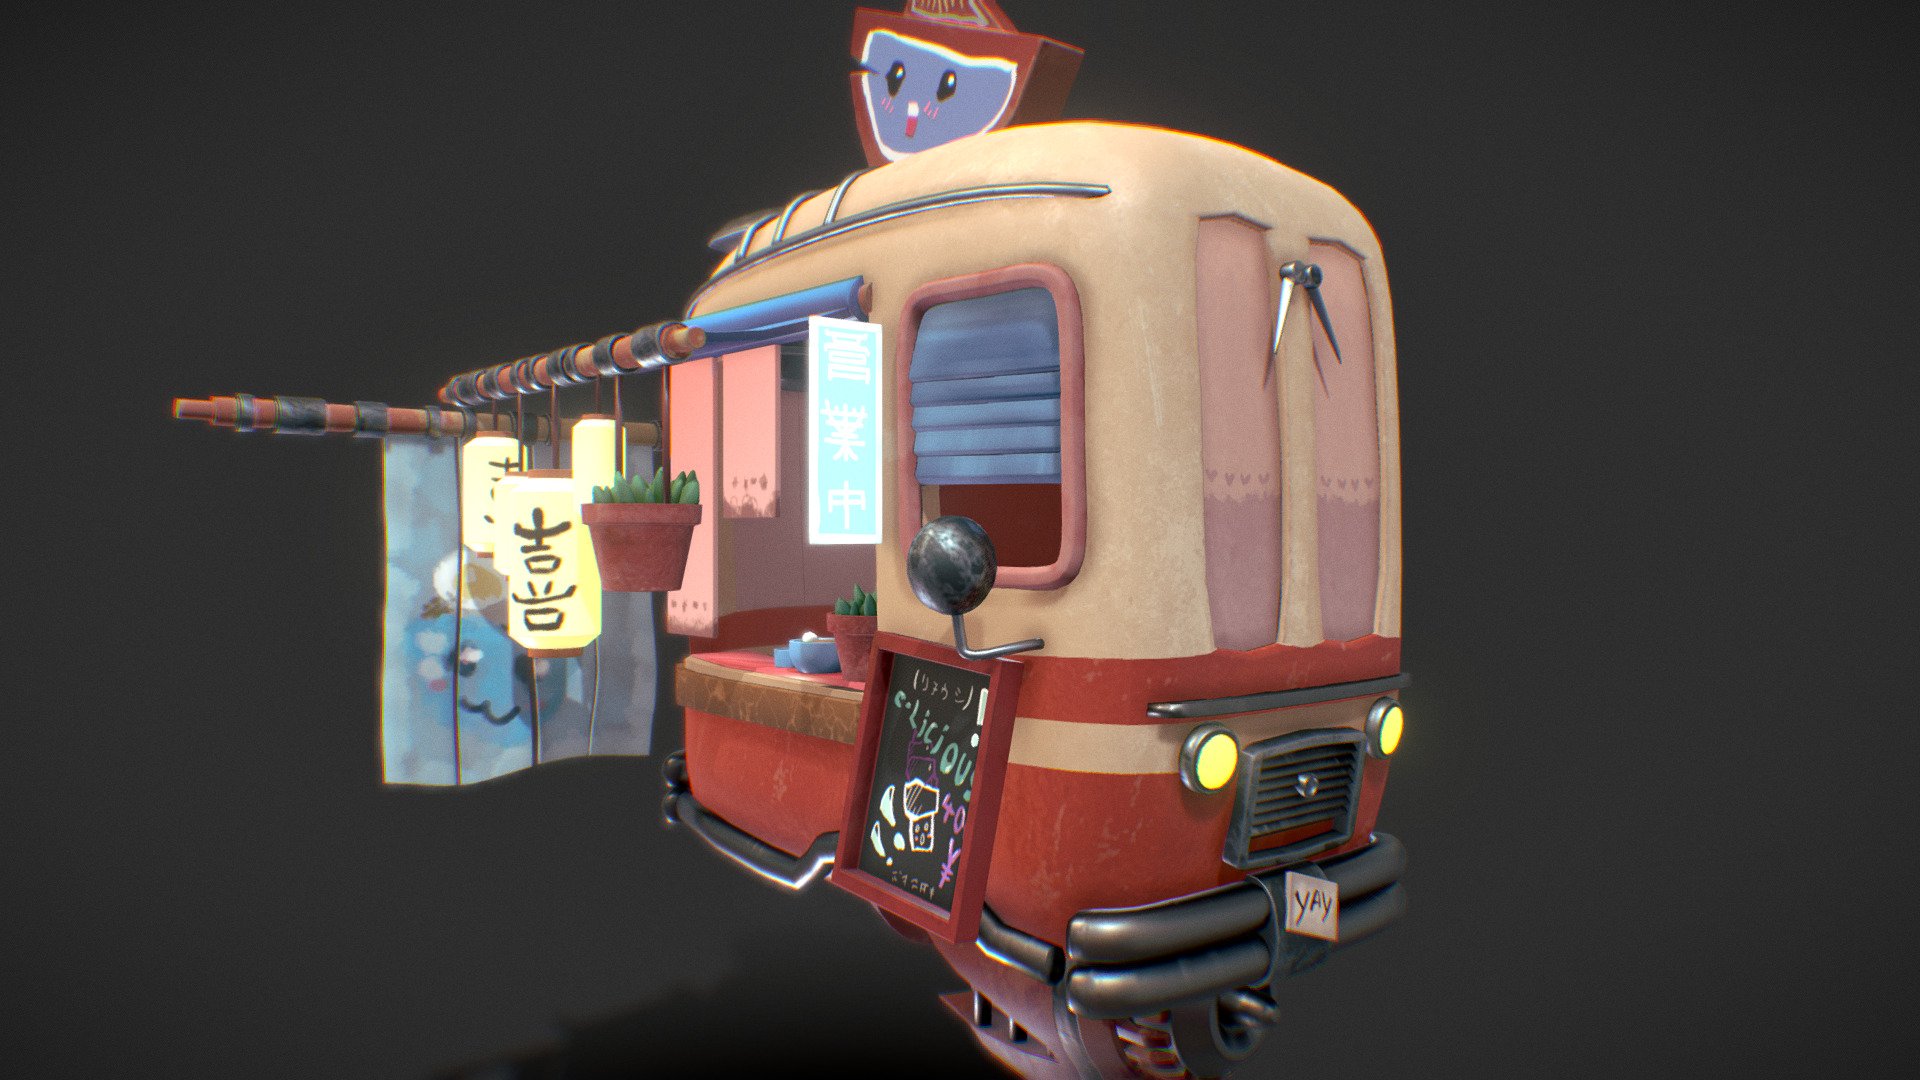 Made for practice

Rament Truck 

2D Images to 3D Model

Game Ready Model

Ref: https://www.artstation.com/artwork/OyJYOg,
https://www.artstation.com/artwork/v690x - Ramen Truck - 3D model by Amiko (@Amikos) 3d model